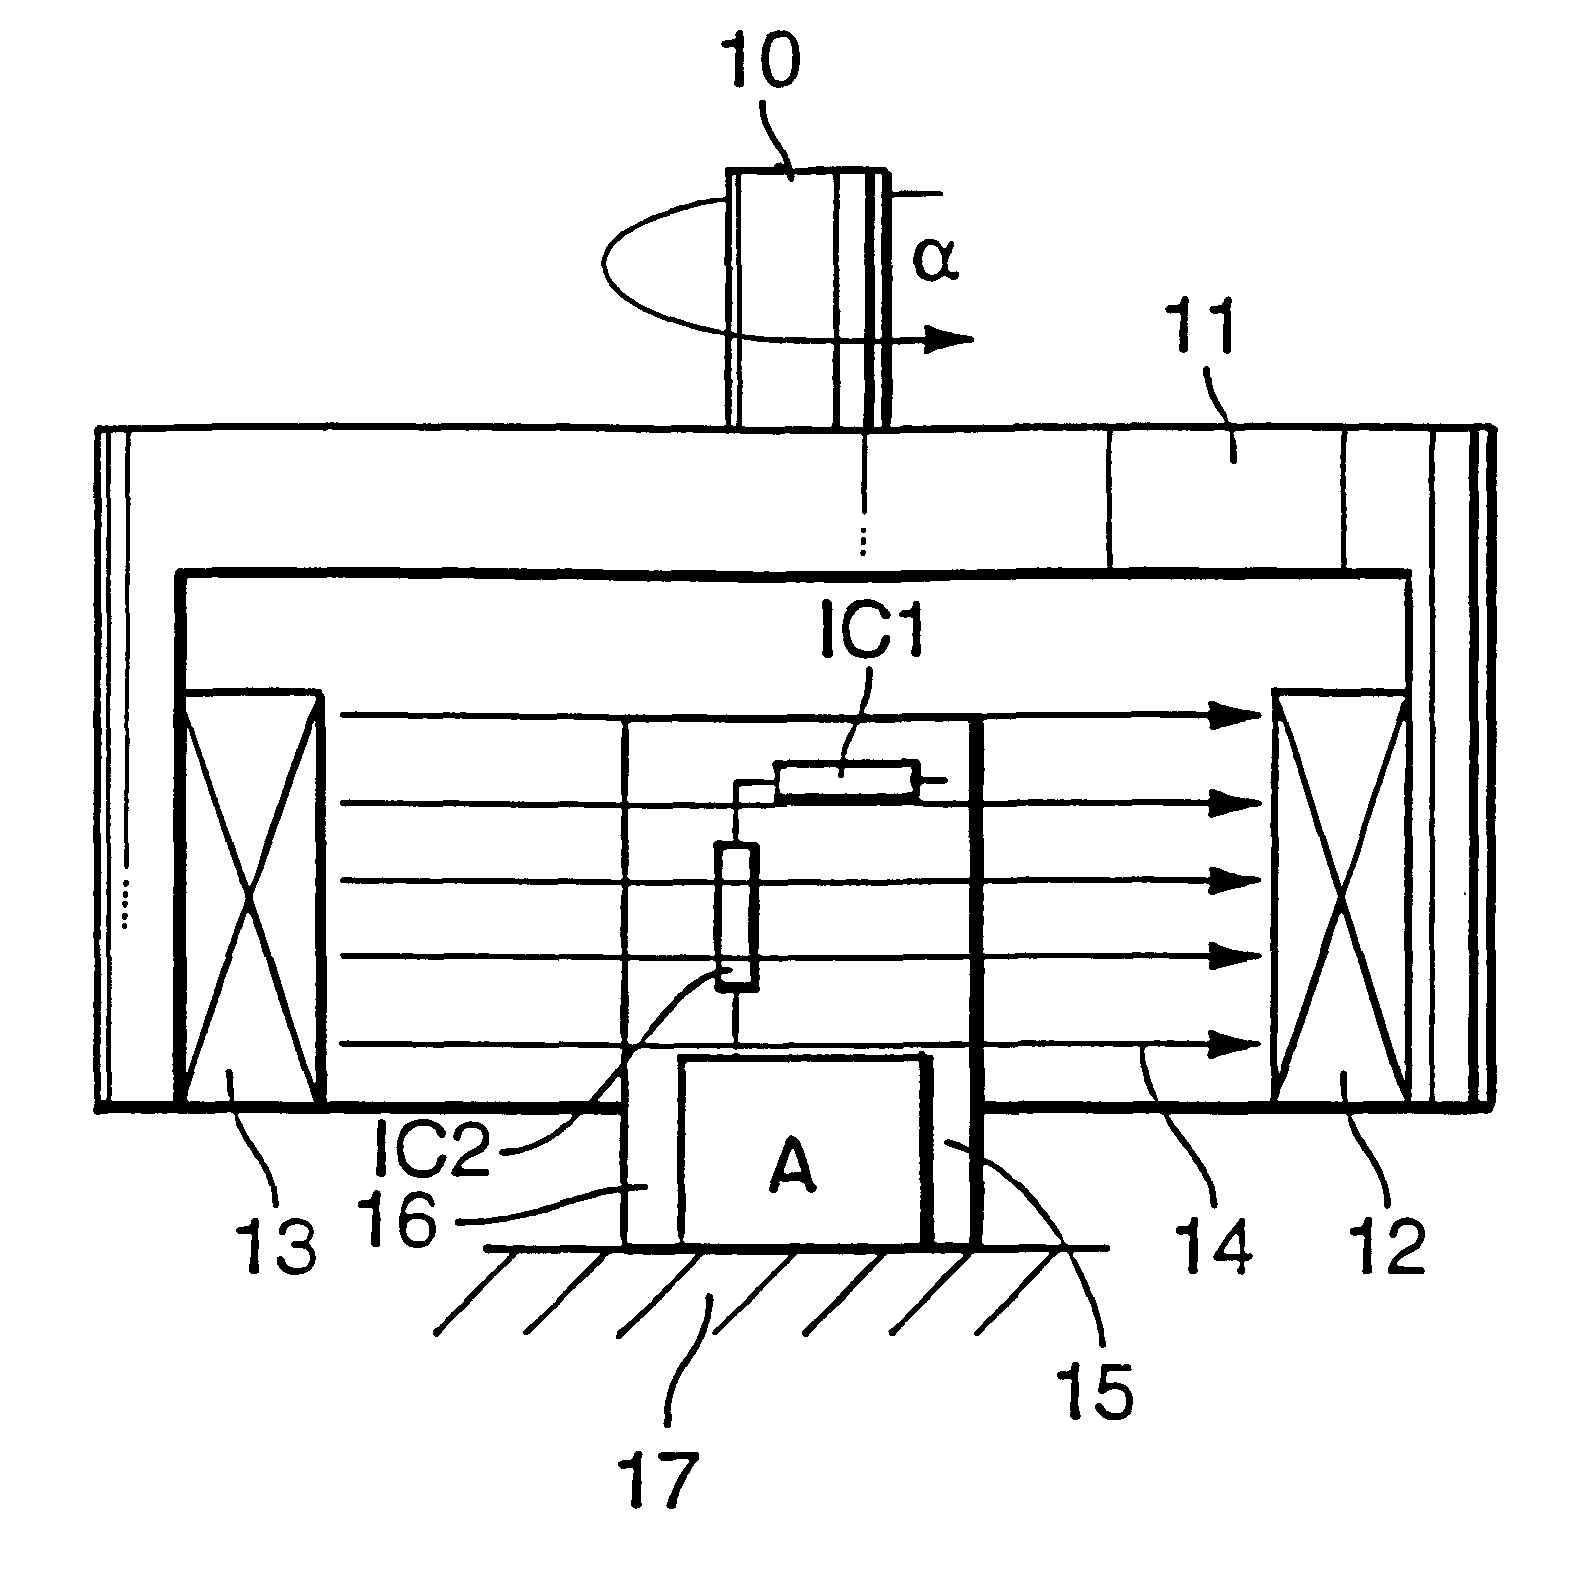 Non-contact system for detecting an angle of rotation